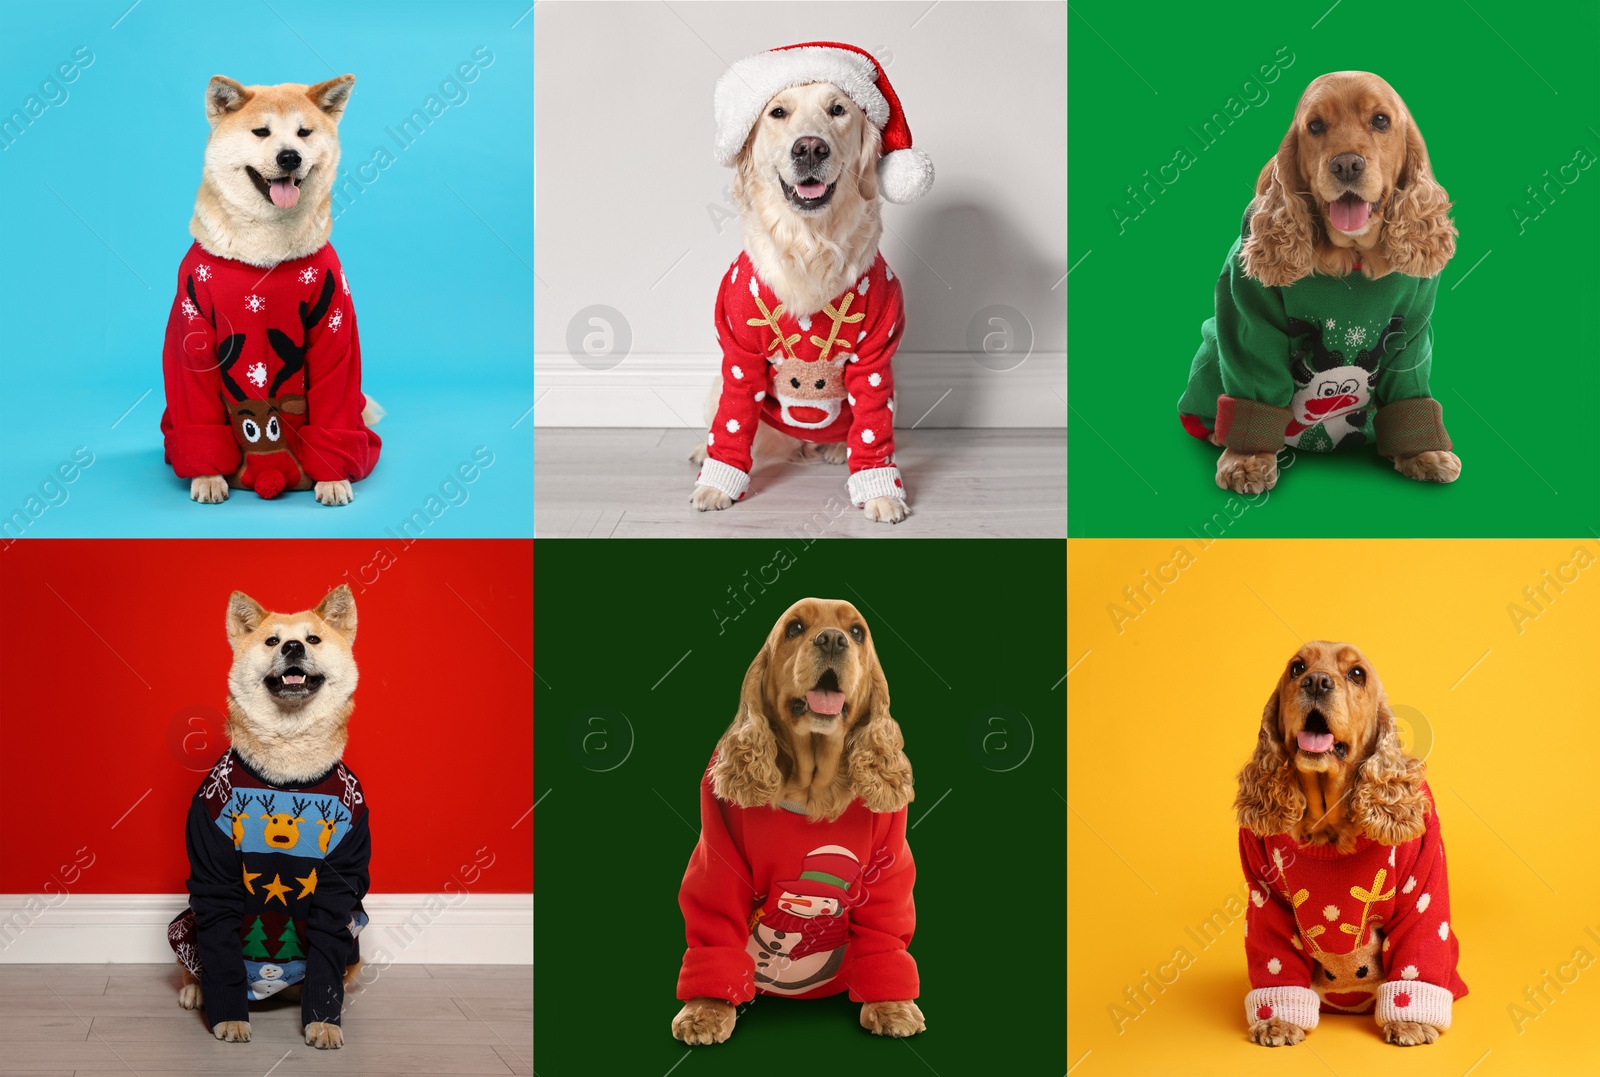 Image of Cute dogs in Christmas sweaters on color backgrounds